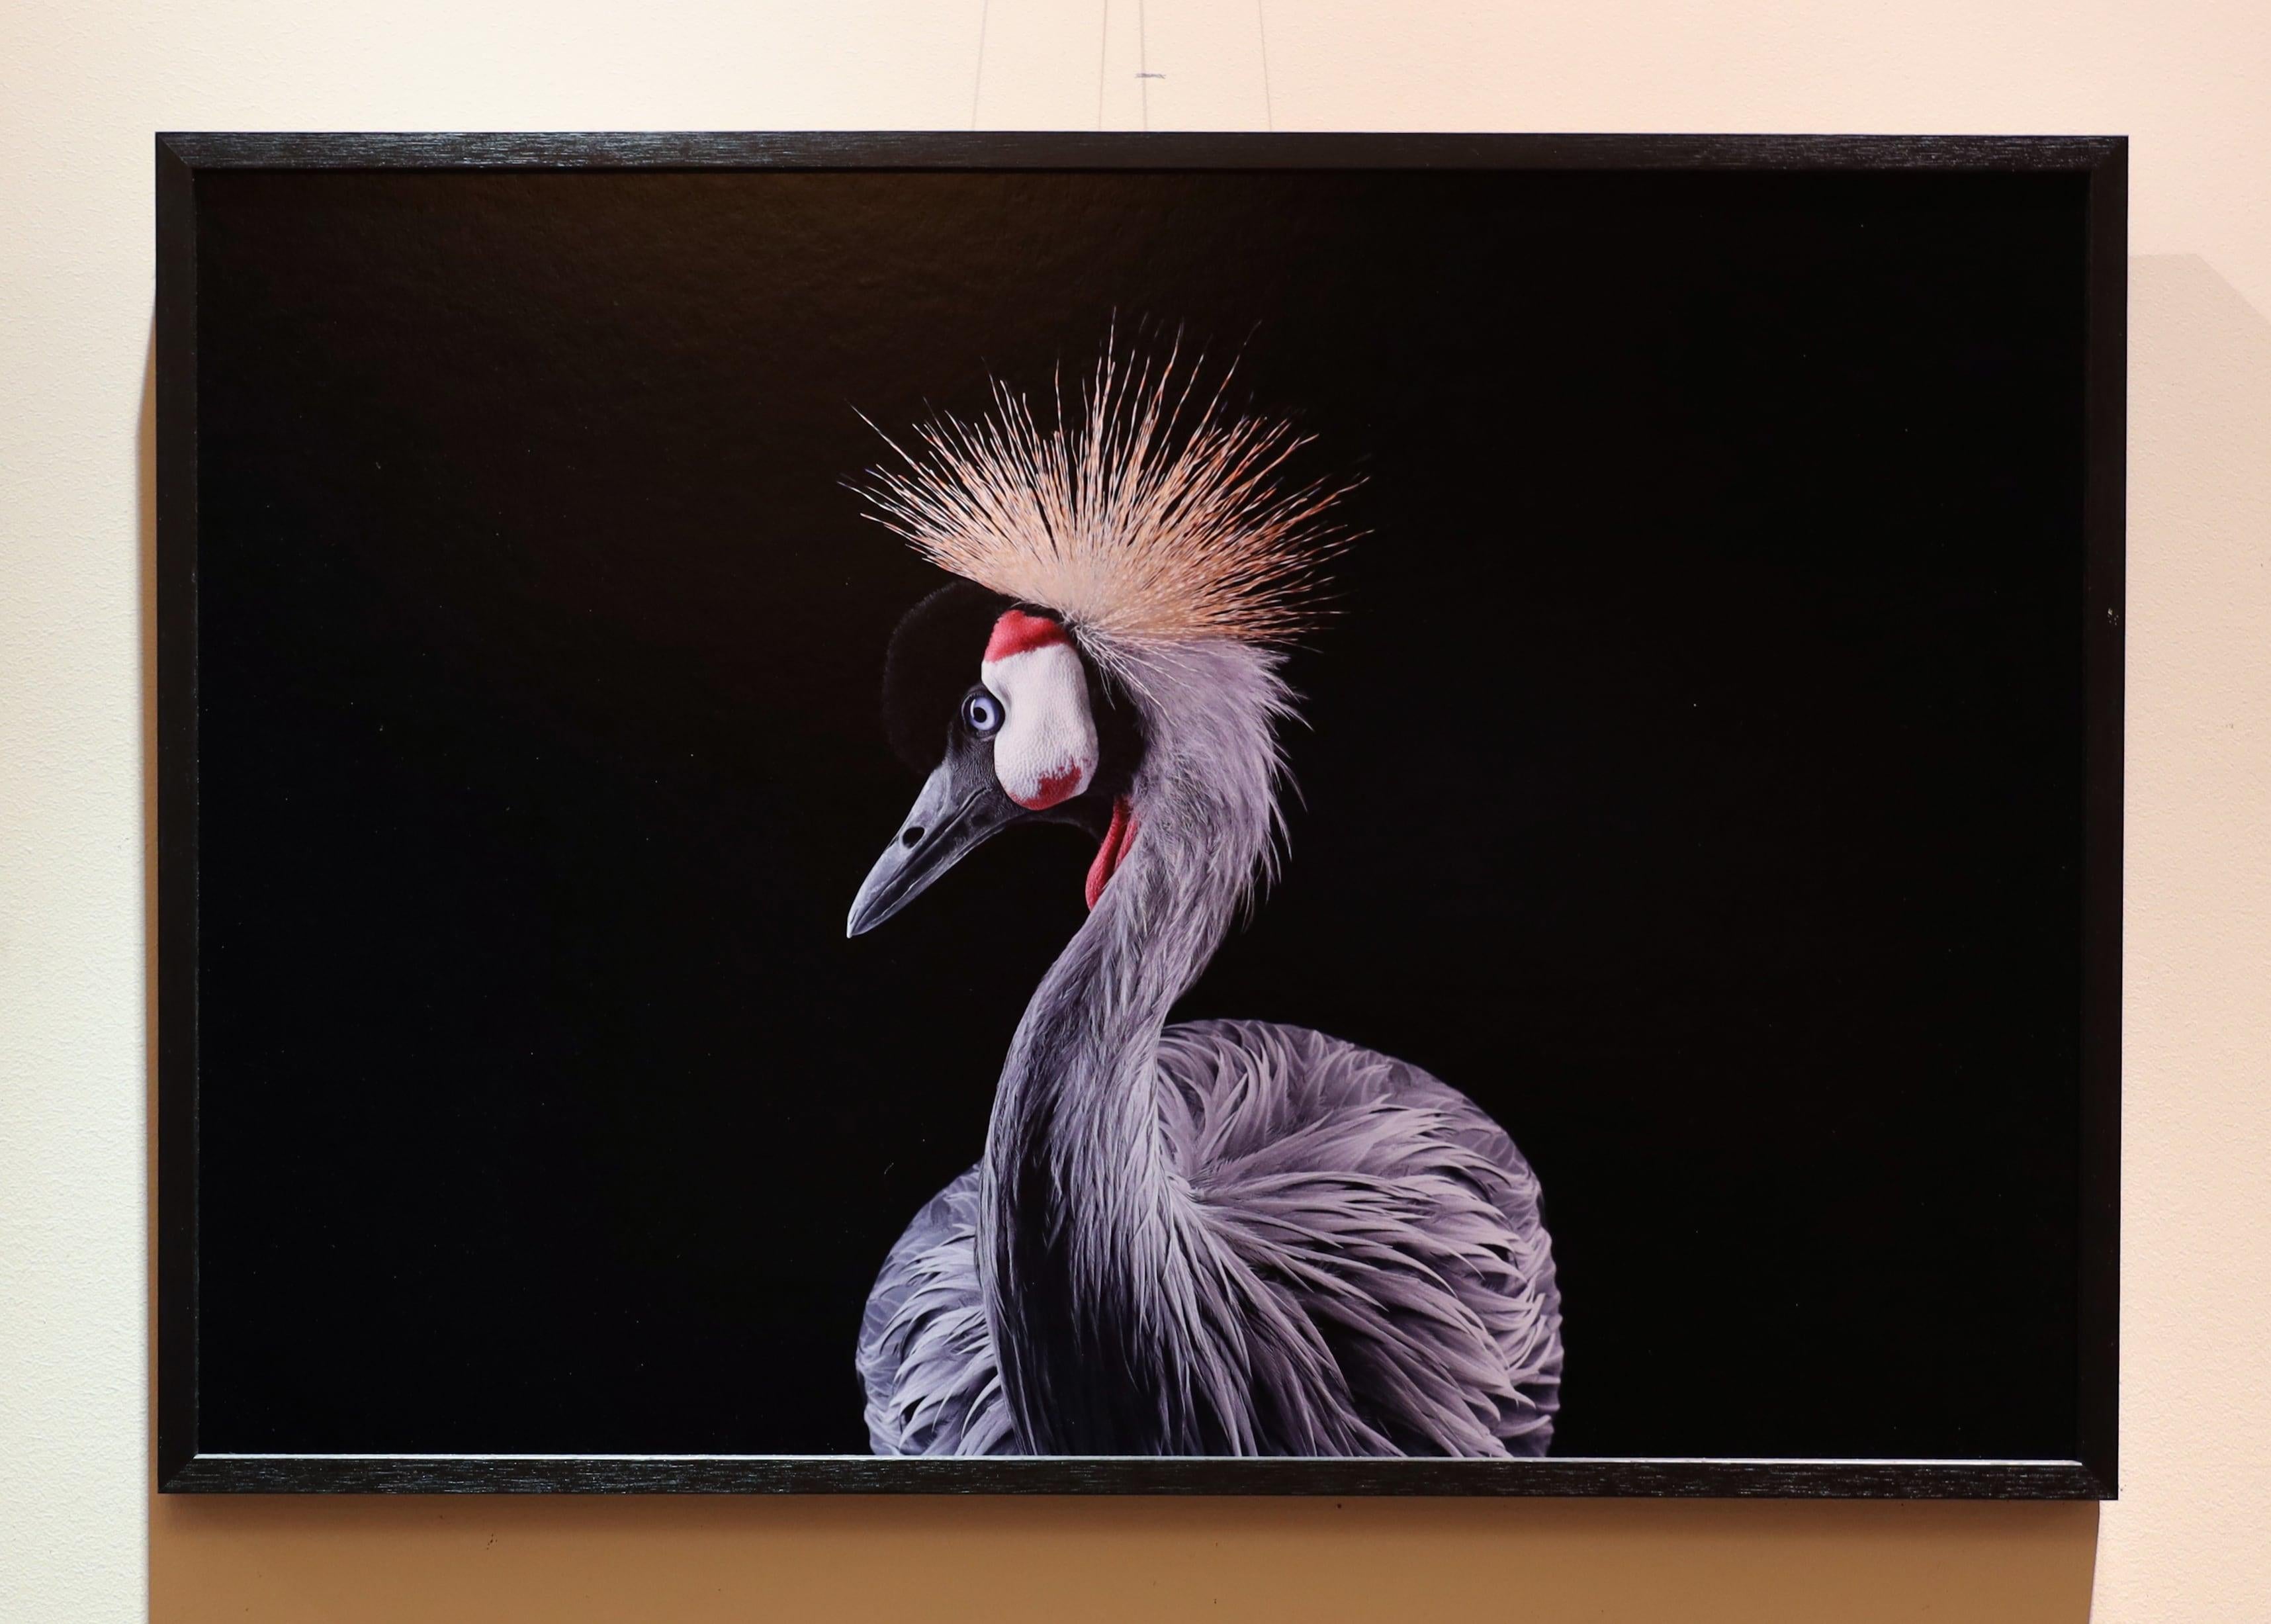 'African Crowned Crane #1, Los Angeles, CA, 2011' is a limited-edition fine art photograph by American photographer Brad Wilson. Archival pigment print on Hahnemühle Fine Art Baryta Paper. 
Prints are available in 3 different sizes, all signed and